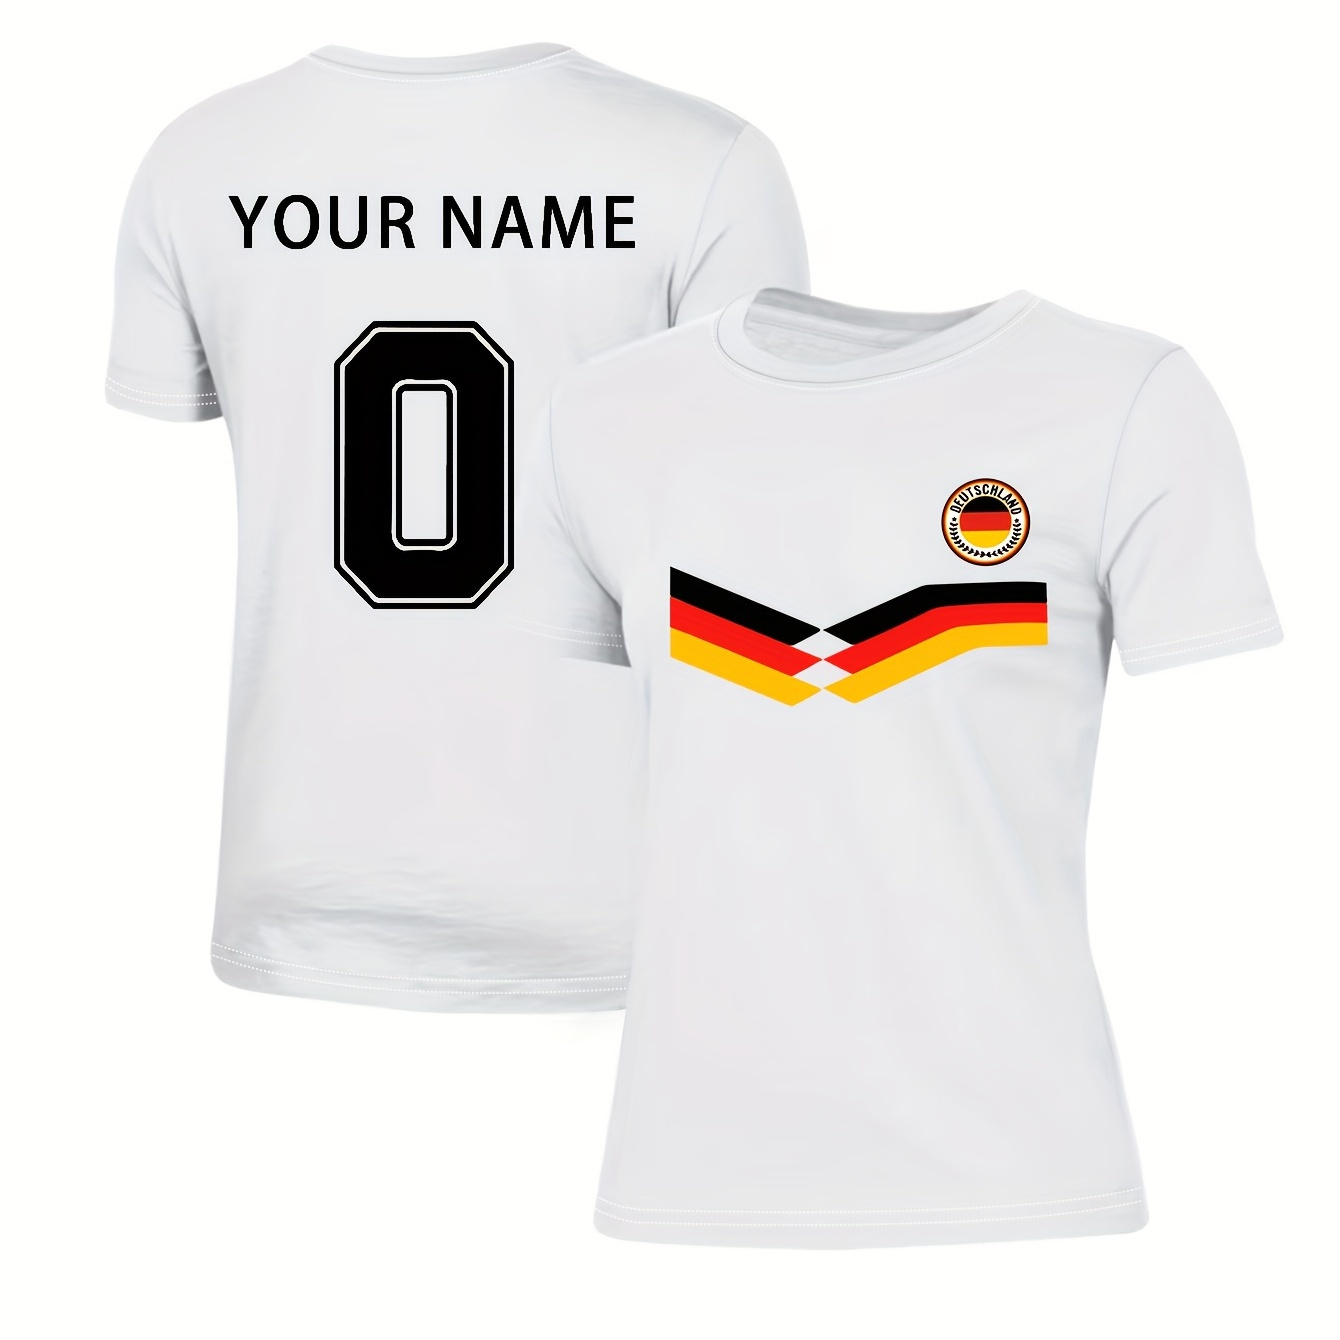 

Euro Deutschland Customized Name & Number T-shirt, A Commemorative Gift Of Custom-made For Fans, Women's Clothing